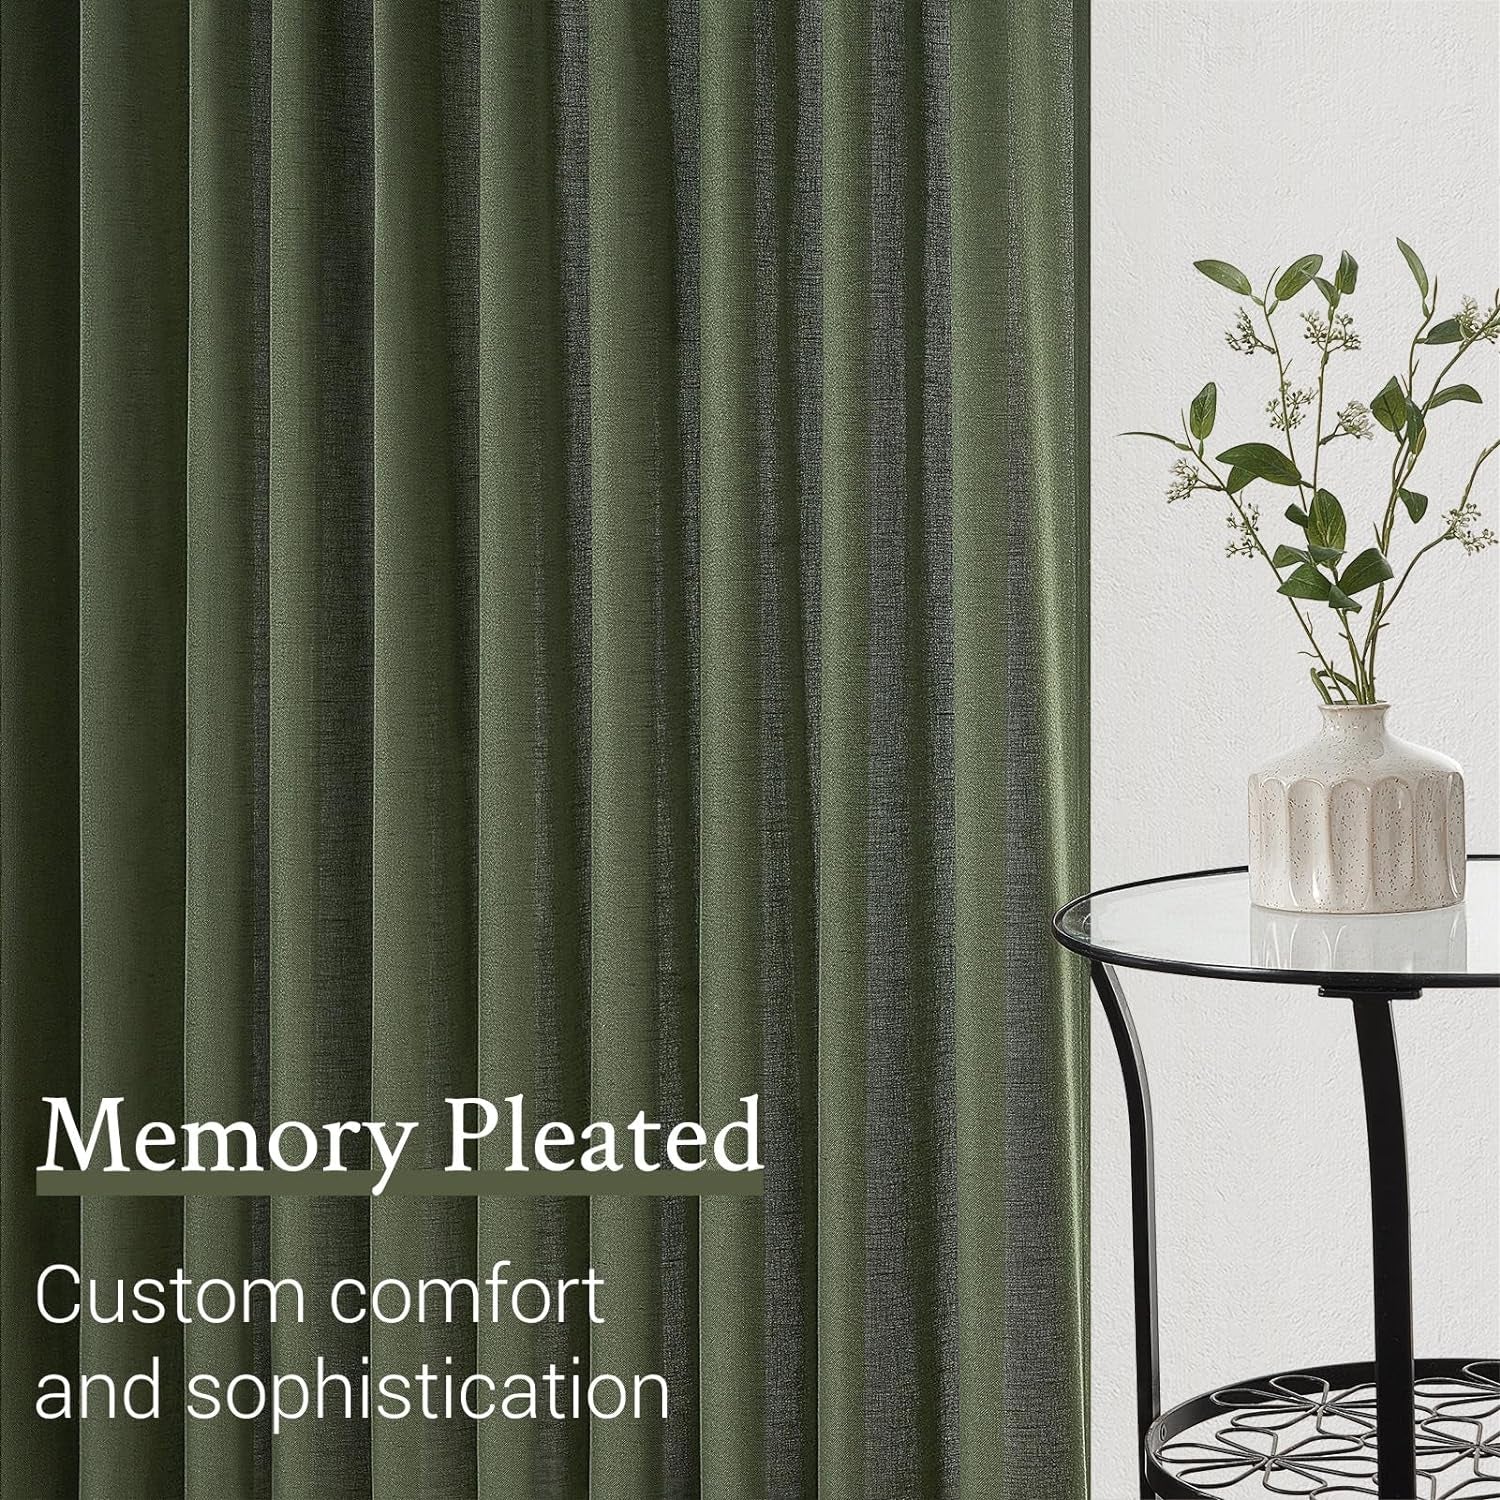 Olive Green Linen Curtains 84 Inches Long for Living Room,Pinch Pleated Drape with Hooks Back Tab Light Filtering Boho Spring Home Decor, Forest/Hunter Green Sheer Curtains 84 Inch Length for Bedroom  Topfine   